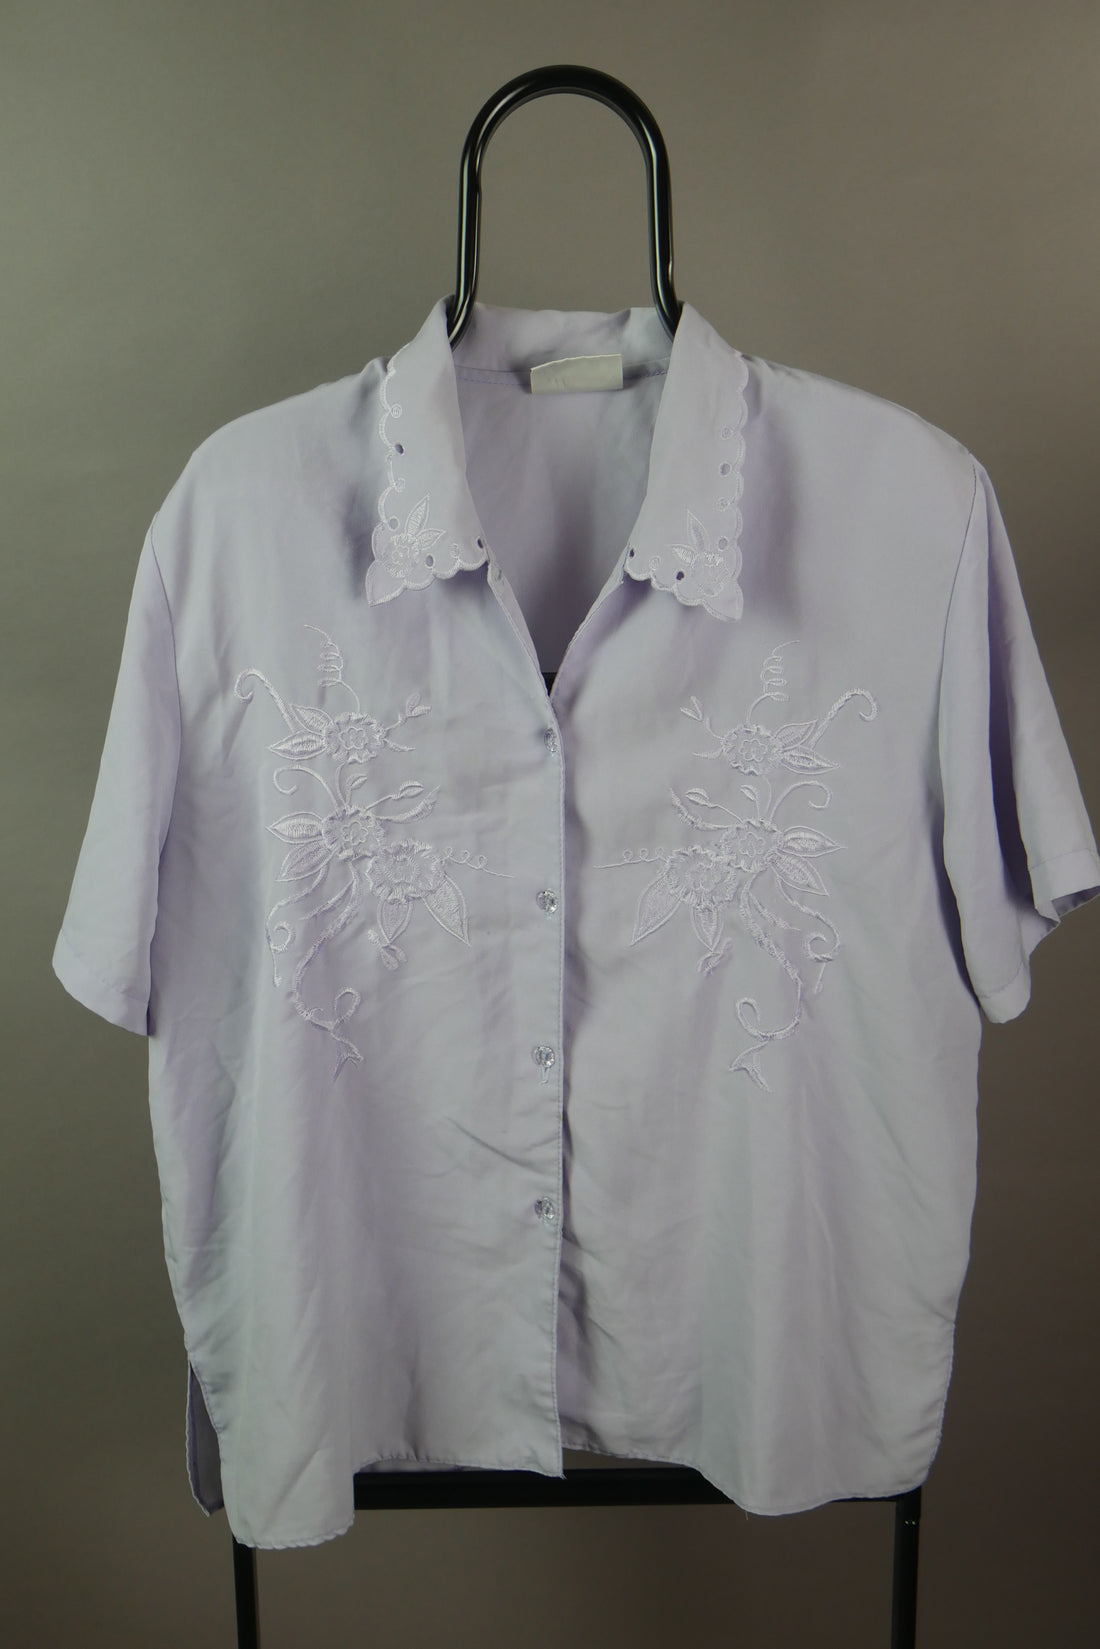 The Vintage Embroidered Shirt (18)